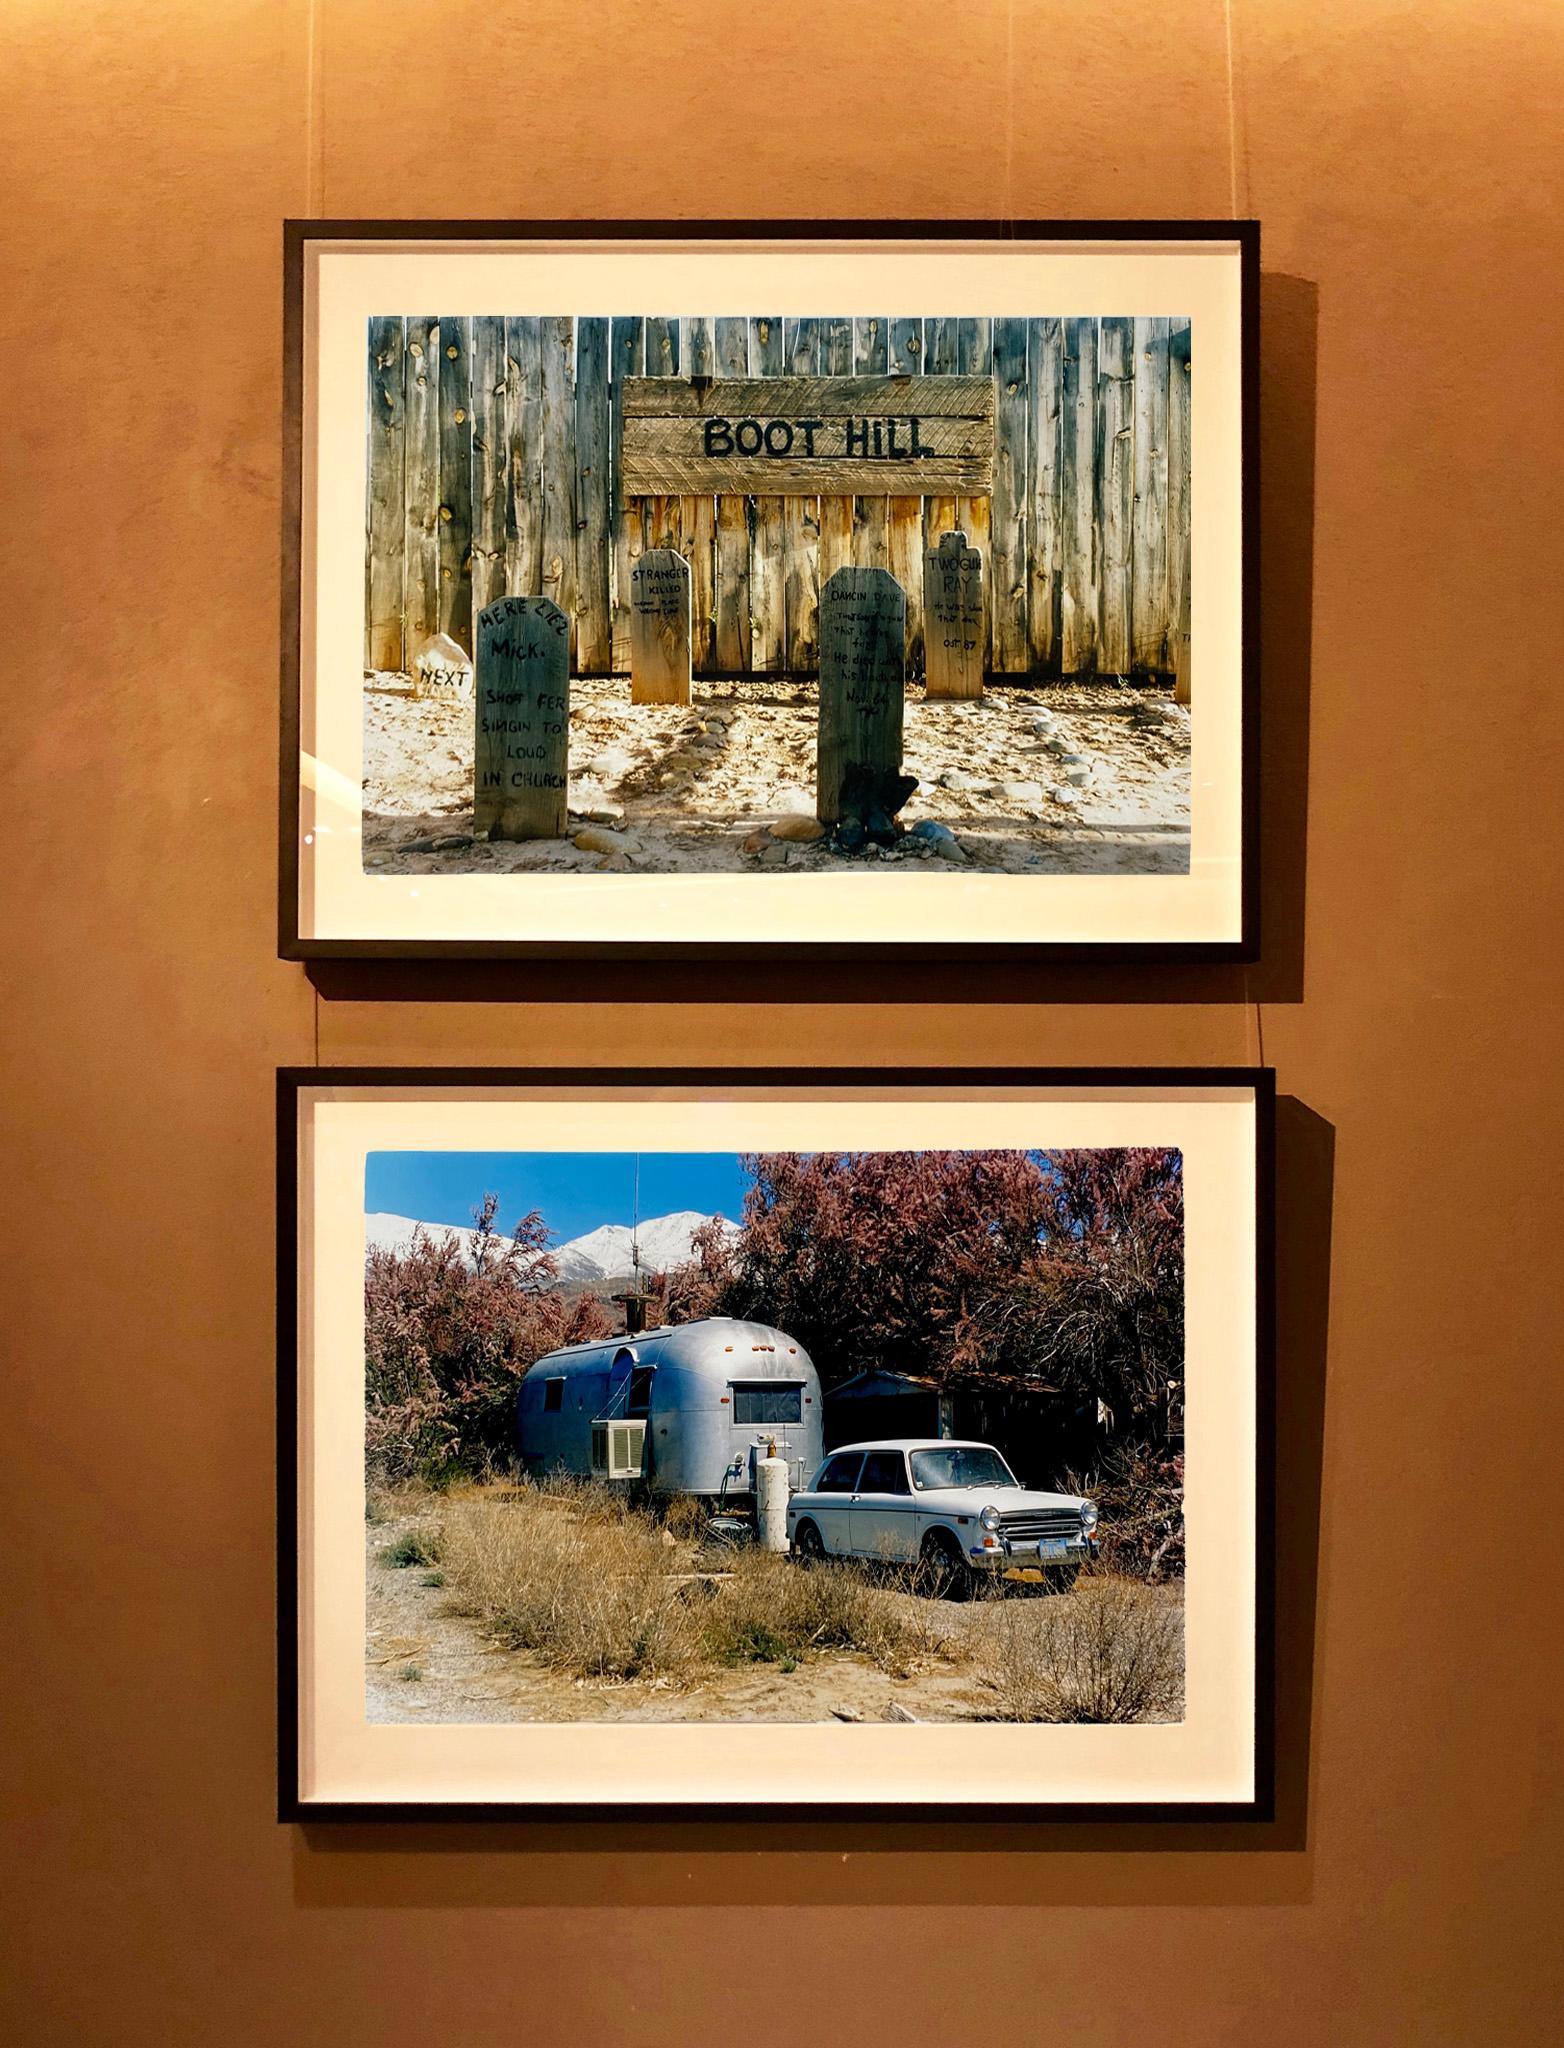 This cinematic Californian road trip artwork shows a classic British Austin Morris 1100 car, attached to an iconic American Airstream RV. Photographed in Keeler by Richard Heeps, for his 'Dream in Colour' series.

This artwork is a limited edition